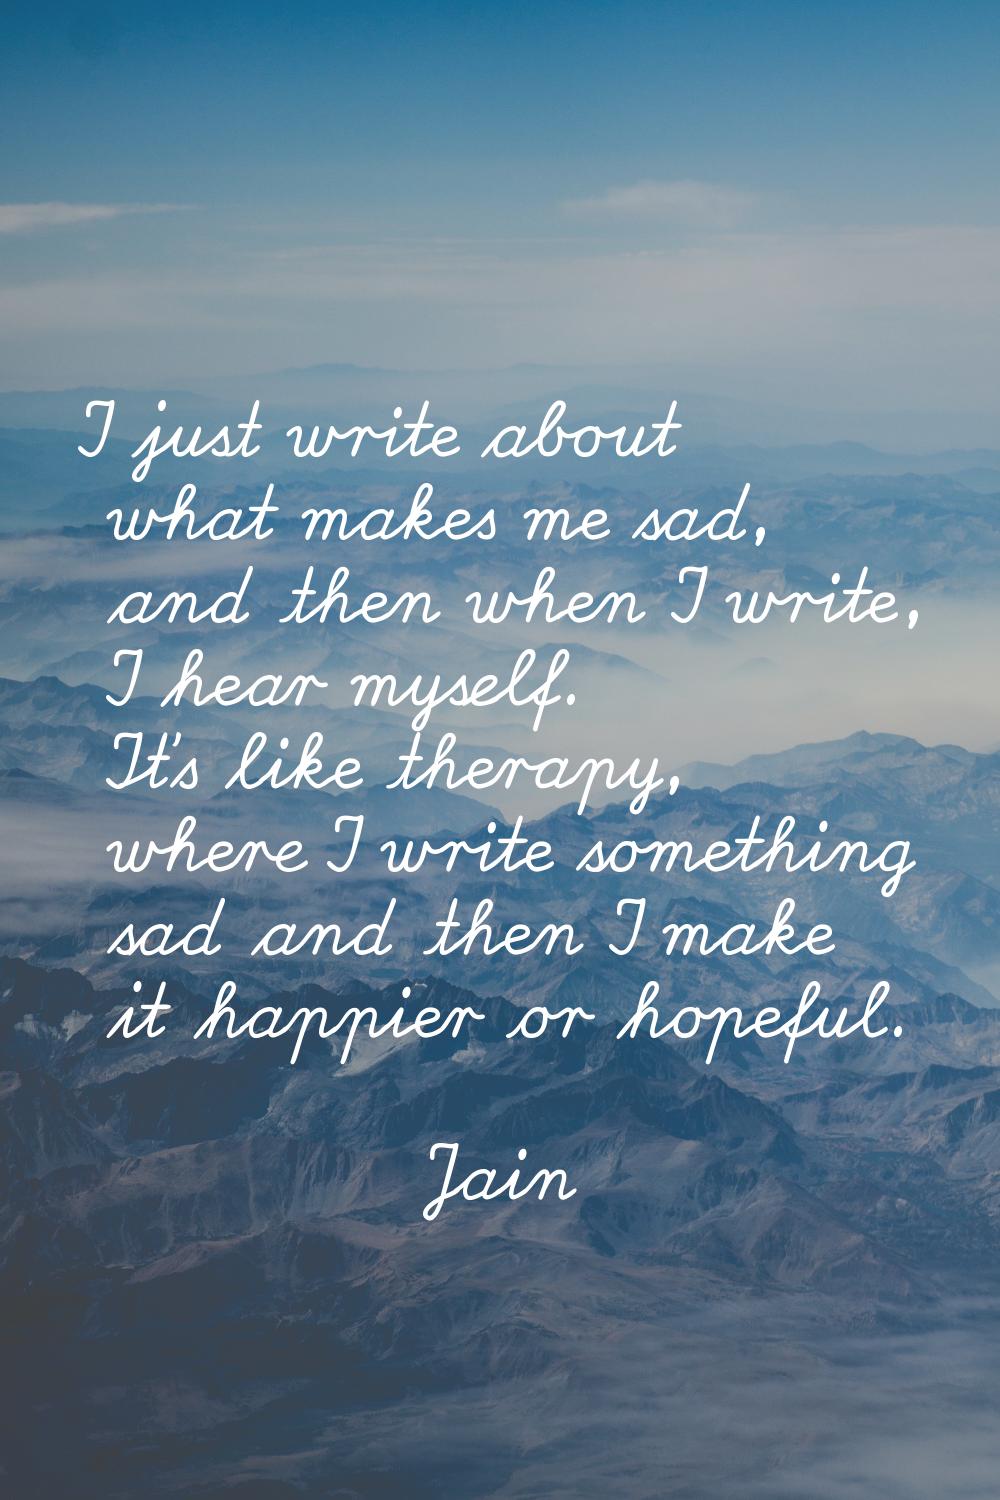 I just write about what makes me sad, and then when I write, I hear myself. It's like therapy, wher